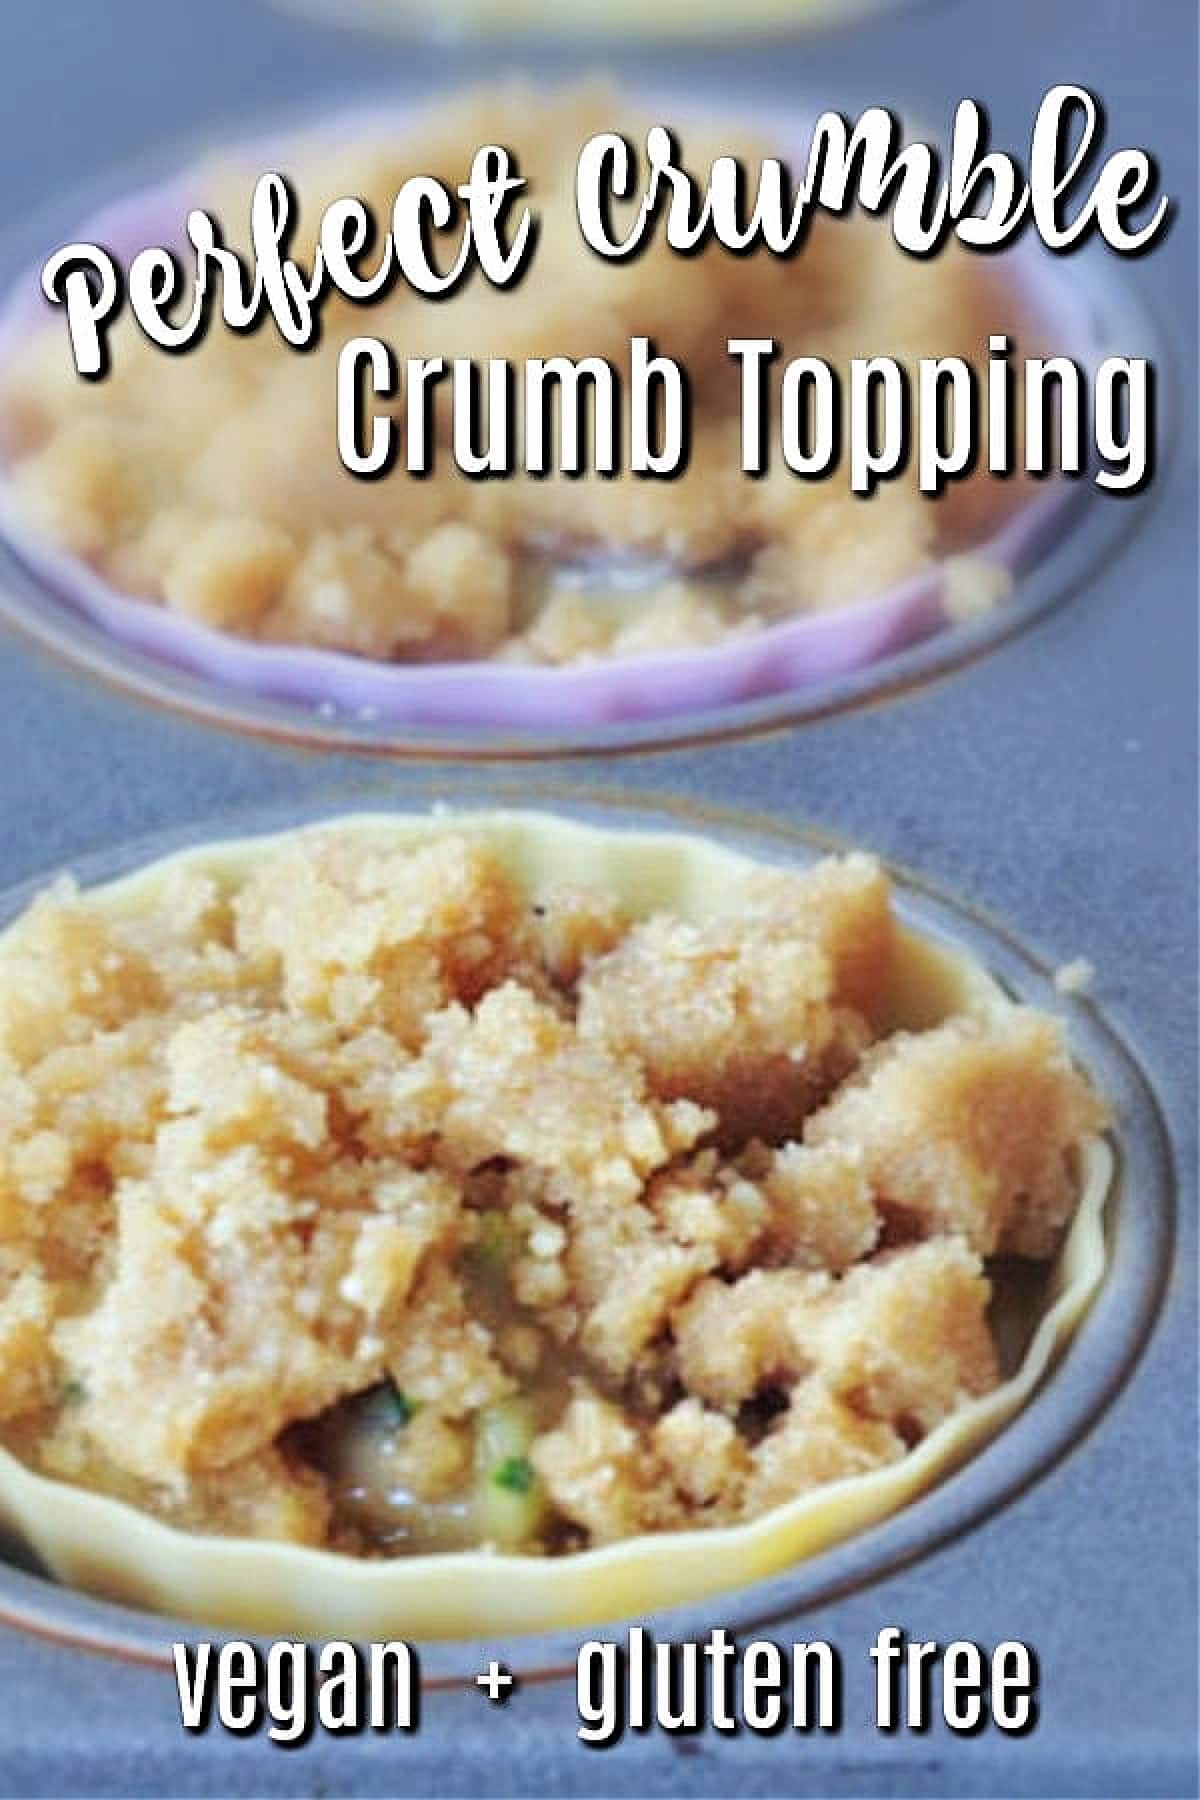 How to make perfect gluten free crumb topping: crumble on top of unbaked muffins.